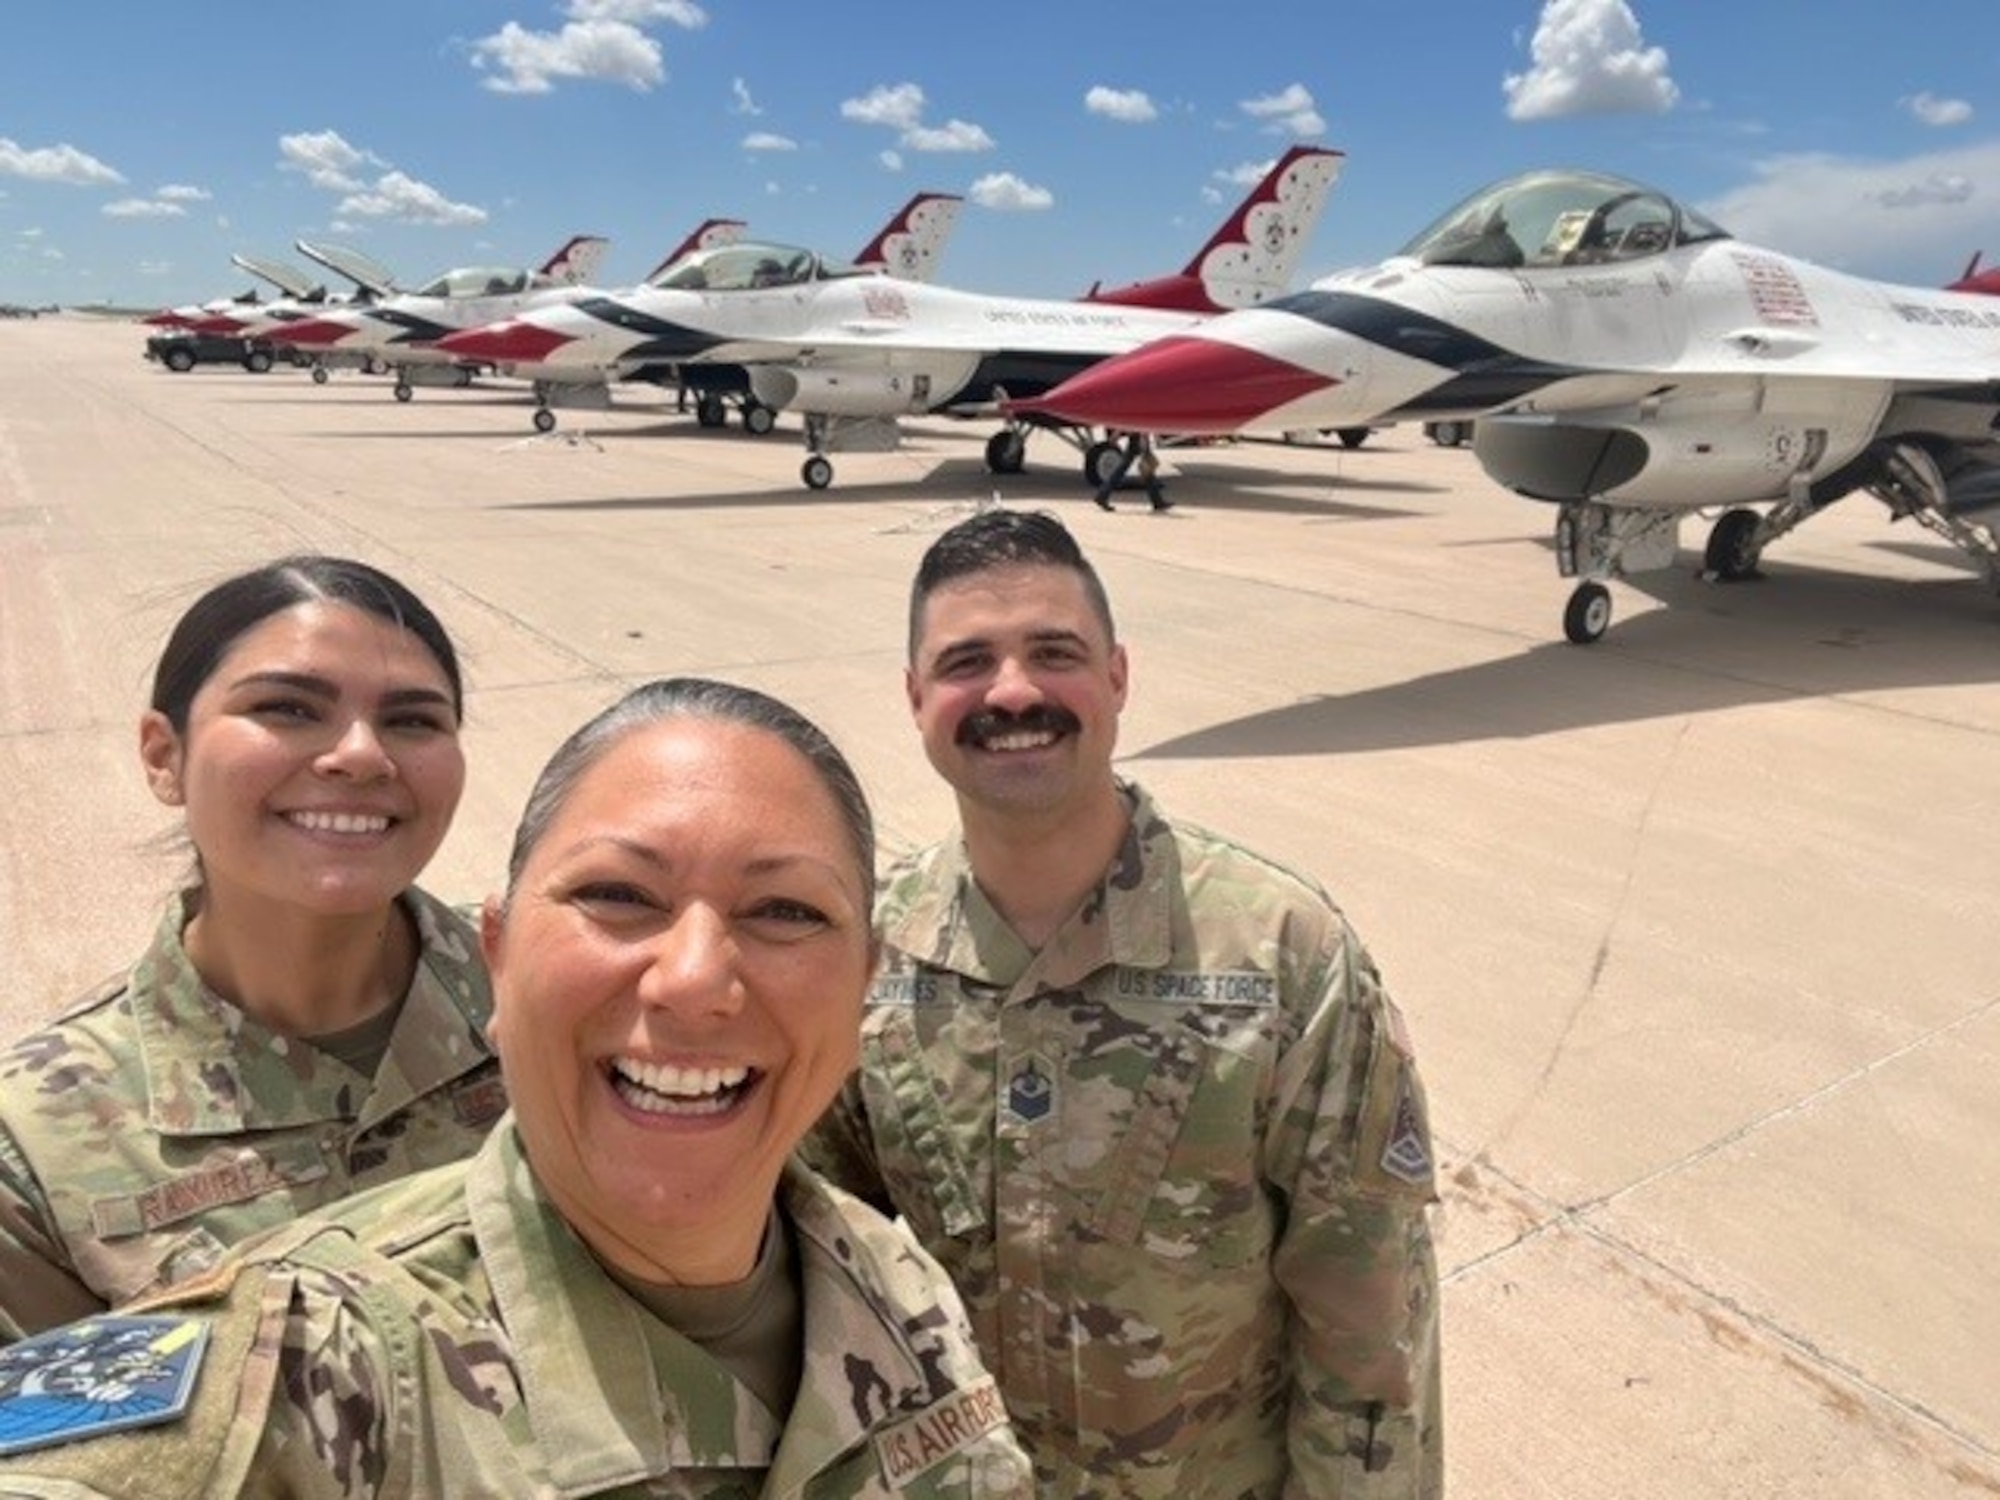 Chief Master Sgt. Sevin Balkuvvar poses for photo with fellow teammates next to U.S. Air Force Thunderbirds aircraft.